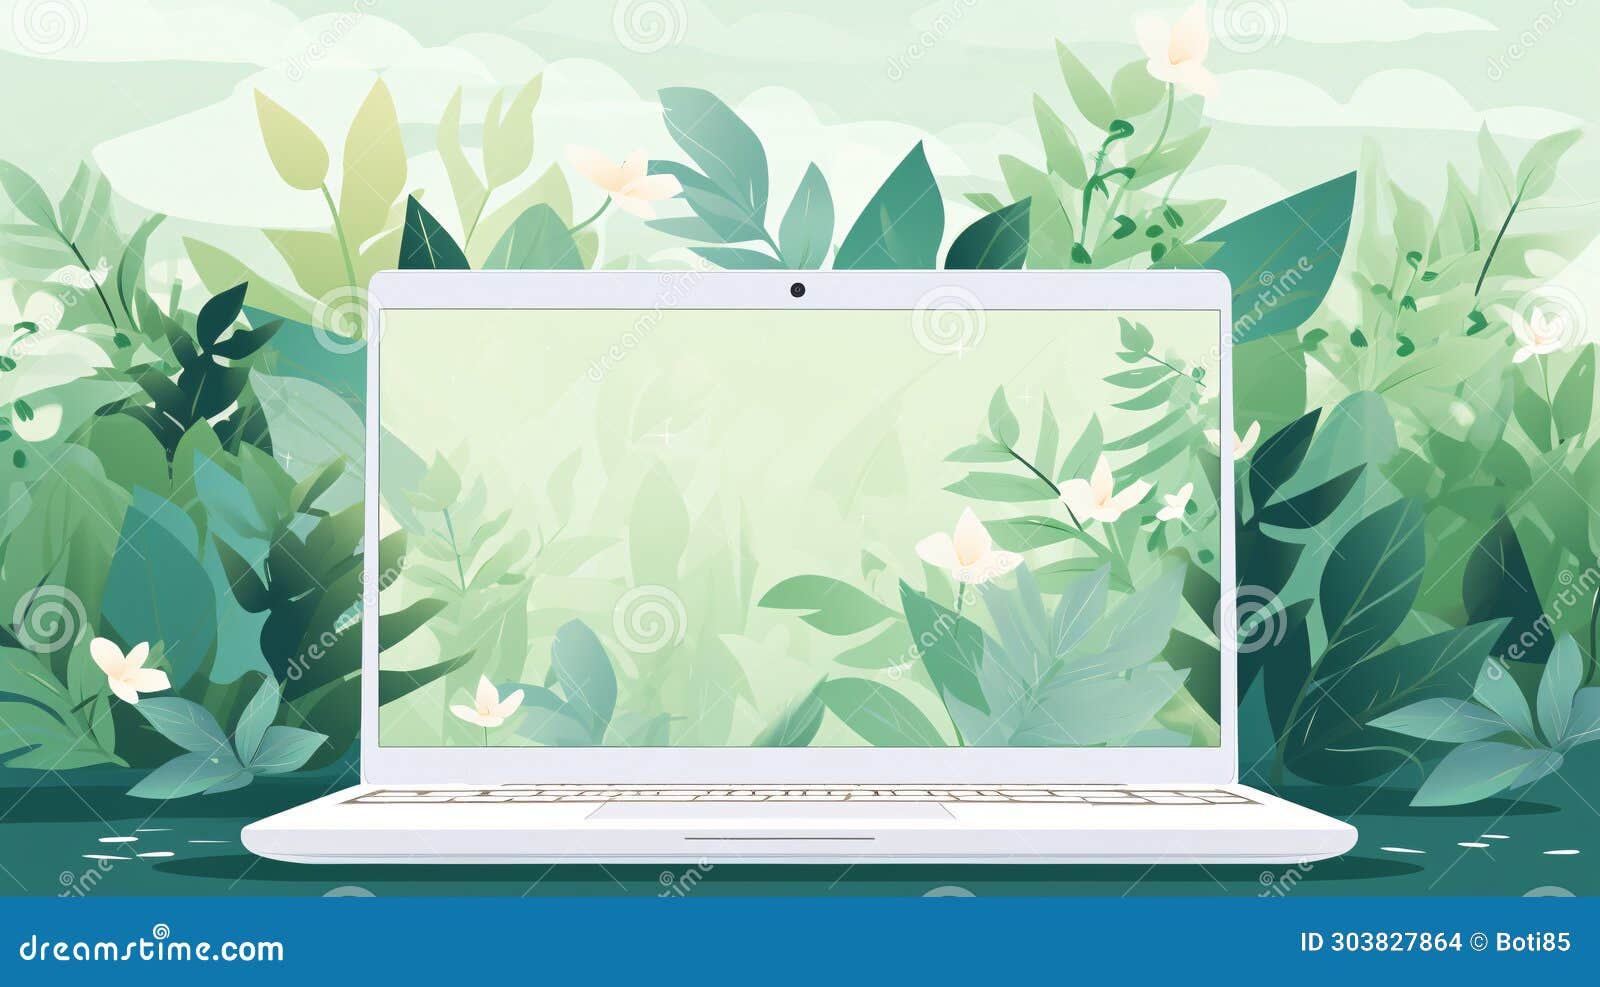 laptop in green vegetation, representing eco friendliness in build materials